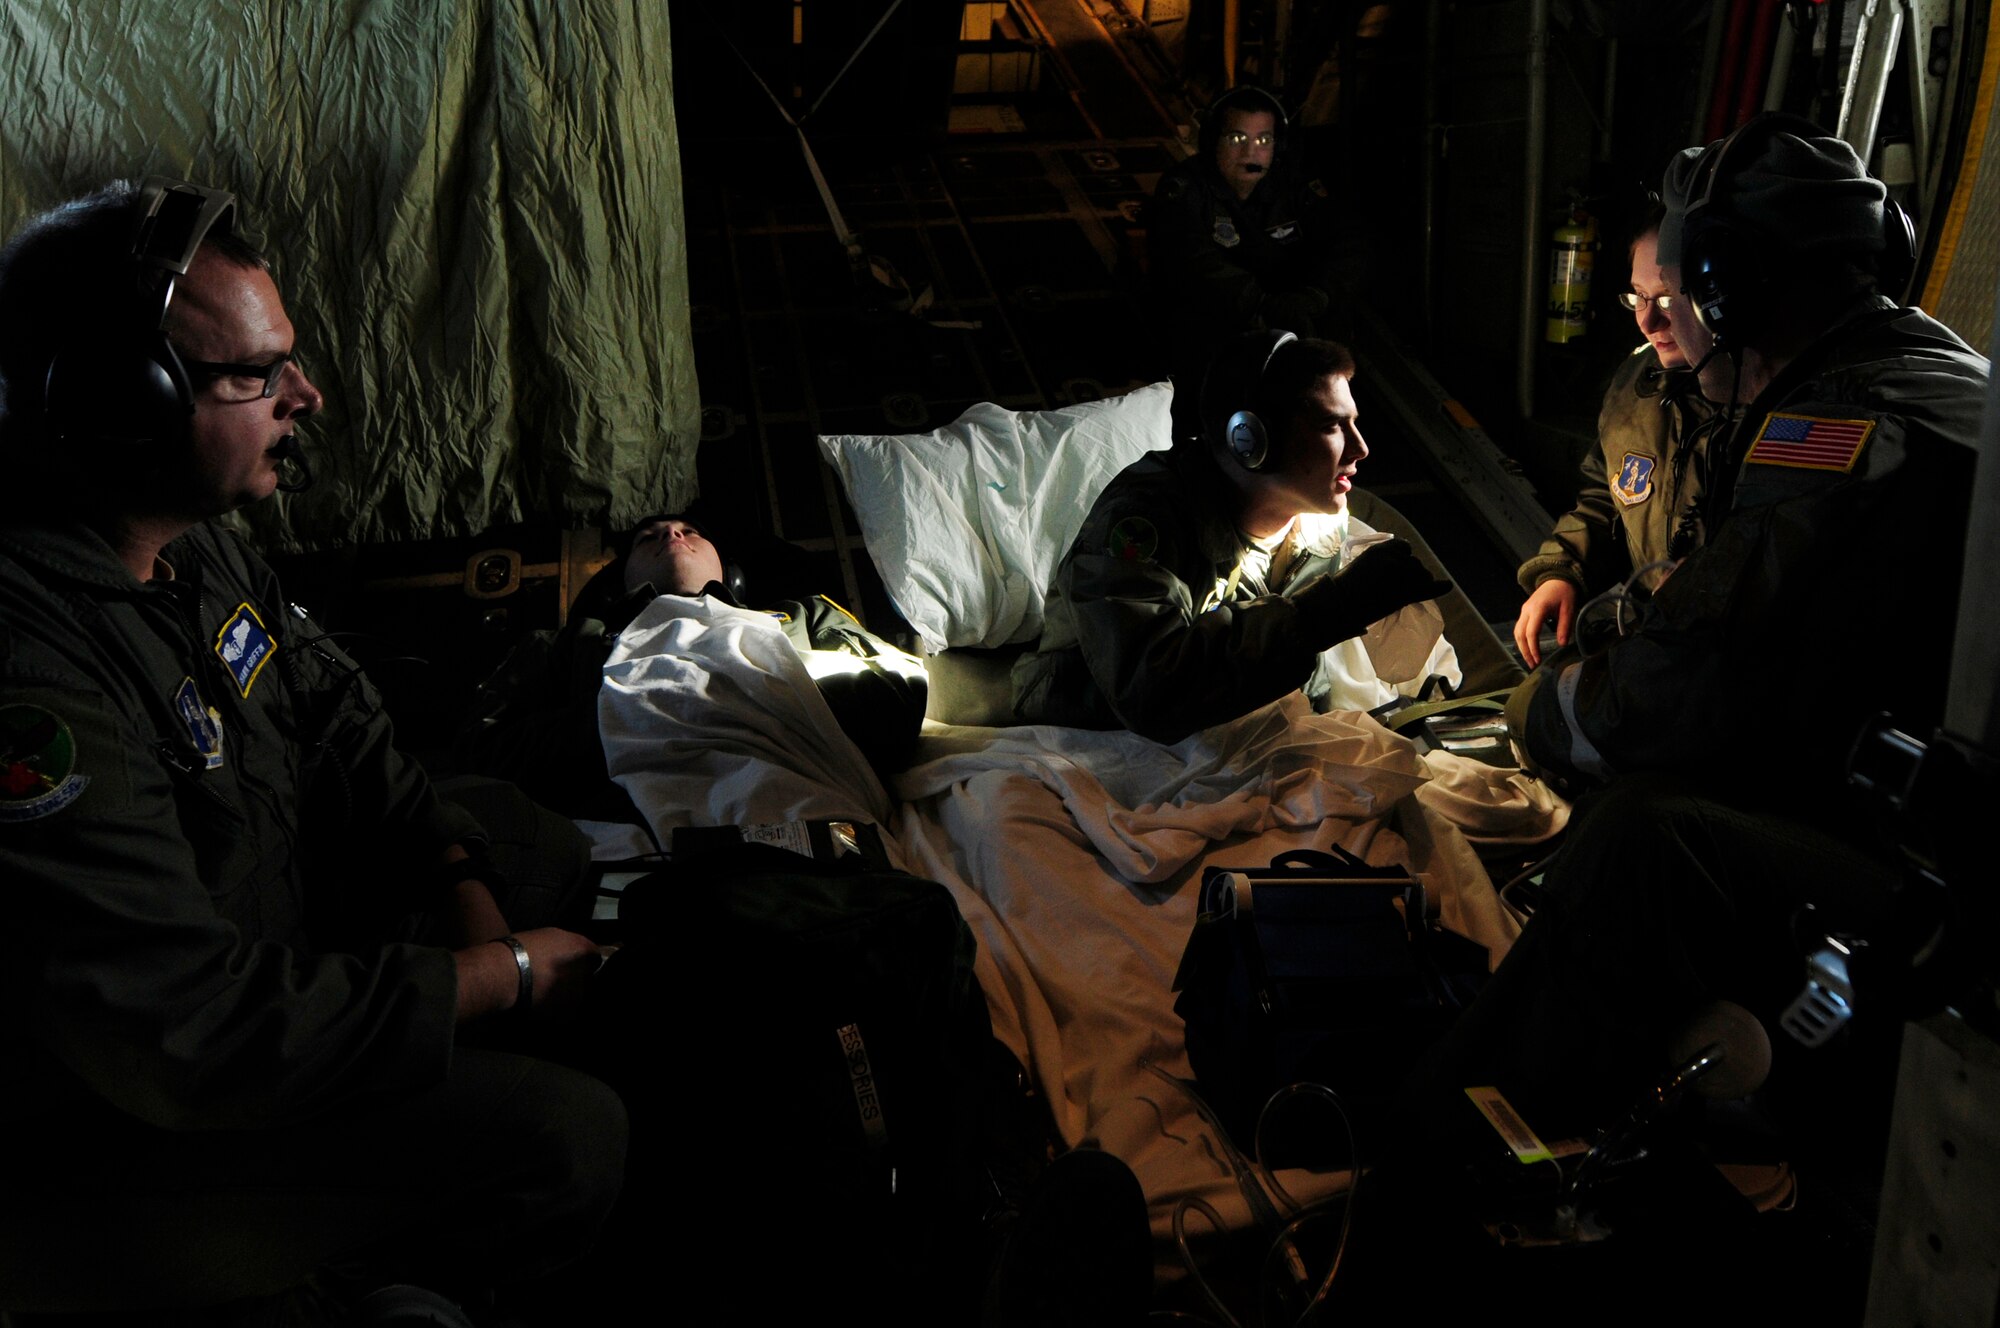 Members of the 156th Aeromedical Evacuation Squadron treat a simulated patient for nausea during an aeromedical training mission roundtrip from North Carolina Air National Guard Base, Charlotte Douglas Intl. Airport, Jan. 9, 2015. The training mission scenario is to transfer patients from Landstuhl Medical Center, Germany, to Malcolm Grove Medical Center, Md. The simulated patient demonstrated symptoms consistent with nausea. (U.S. Air National Guard photo by Staff Sgt. Julianne M. Showalter, 145th Public Affairs/ Released)